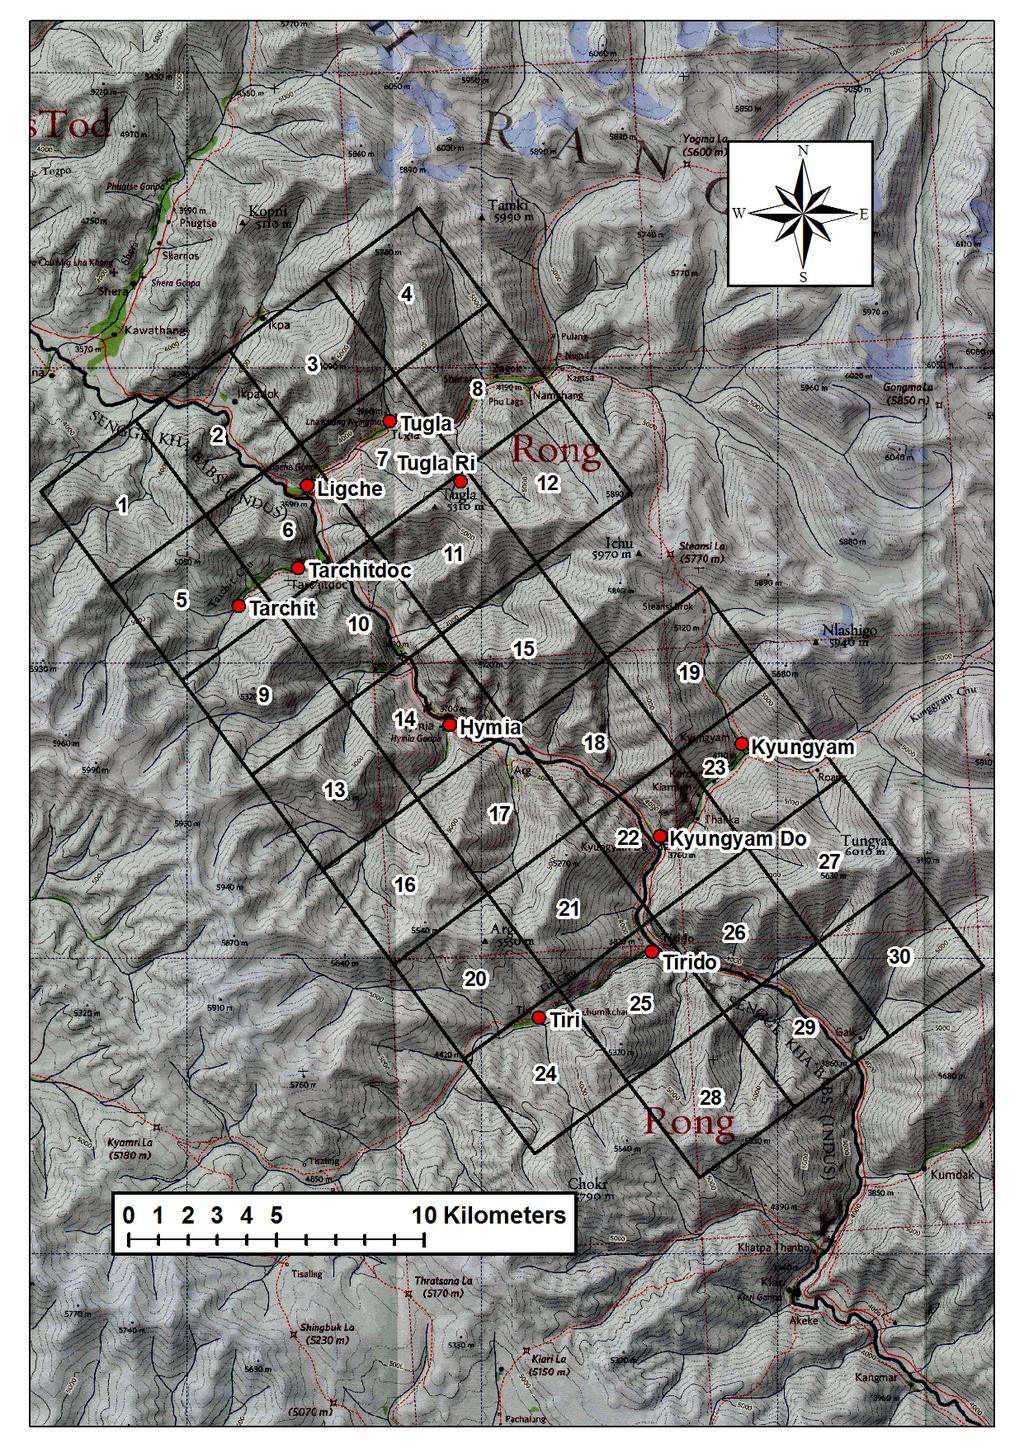 Figure 1: Map of Survey Area Three models of camera traps were used during the study, with all models being dispersed across the survey grid-cells. i.